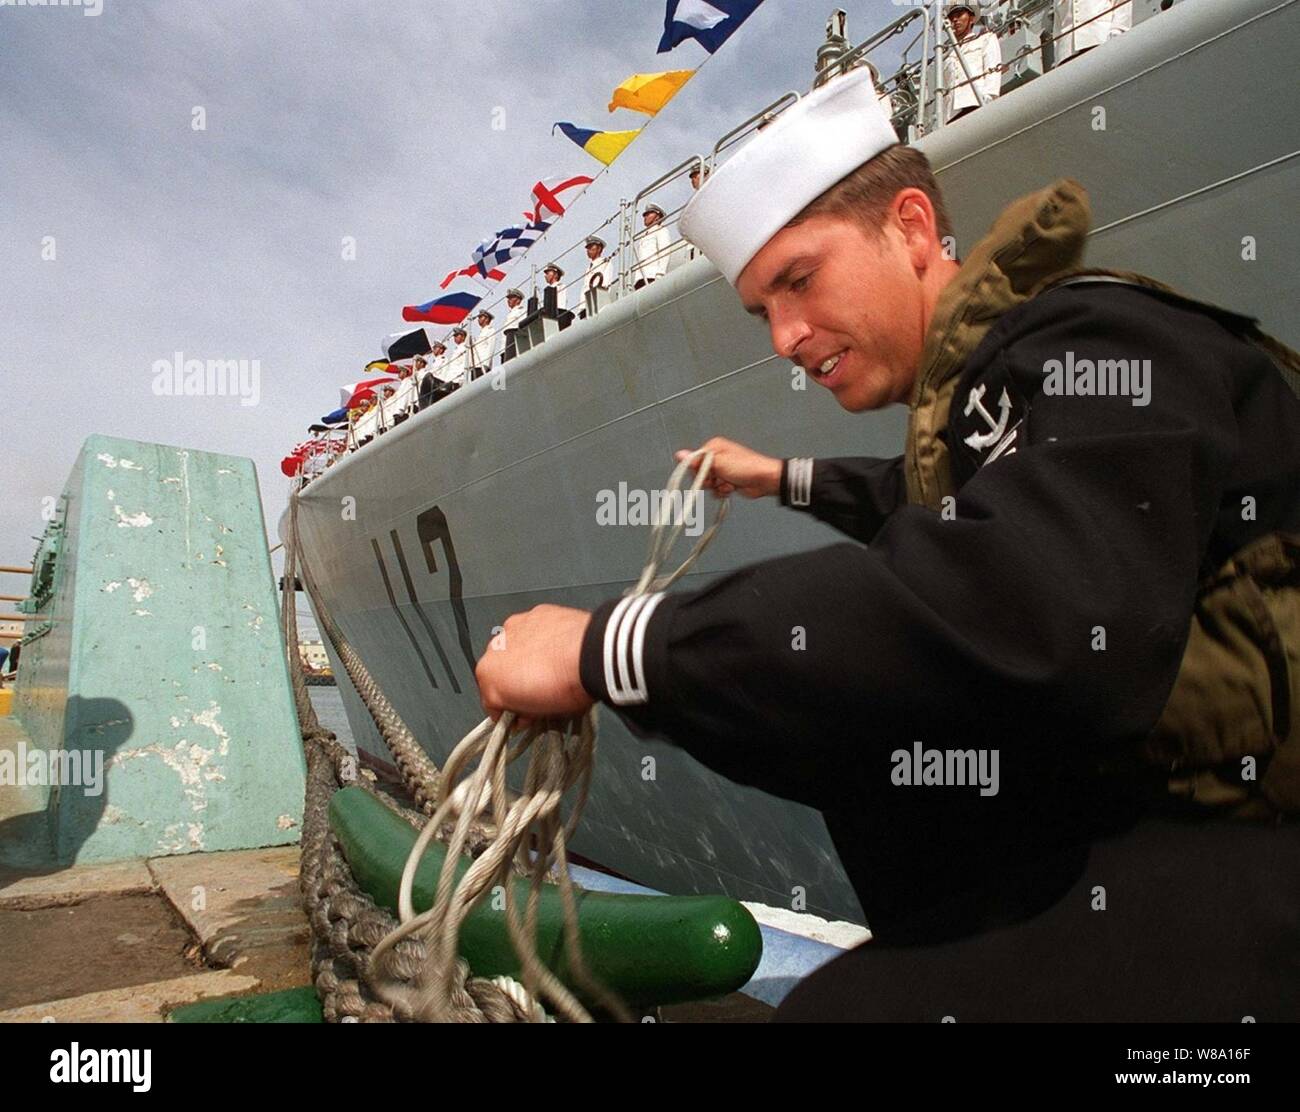 (SAN DIEGO, Calif. MARCH 21, 1997) Seaman Ricardo Ponche lends a hand during line handling party.  Chinese sailors man the decks of the destroyer's HARBIN (DDG 112) as they arrive pier side of Naval Air Station North Island at San Diego as a goodwill gesture between the U. S. and Chinese navies.  This marks the first time Chinese warships have crossed the Pacific and visited the Continental United States.  The destroyers Harbin and Zhuhai, and supply ship Nancang will moor next to the U. S. Navy's aircraft carrier USS Constellation (CV 64), at Naval Station, North Island.  The ships are expect Stock Photo